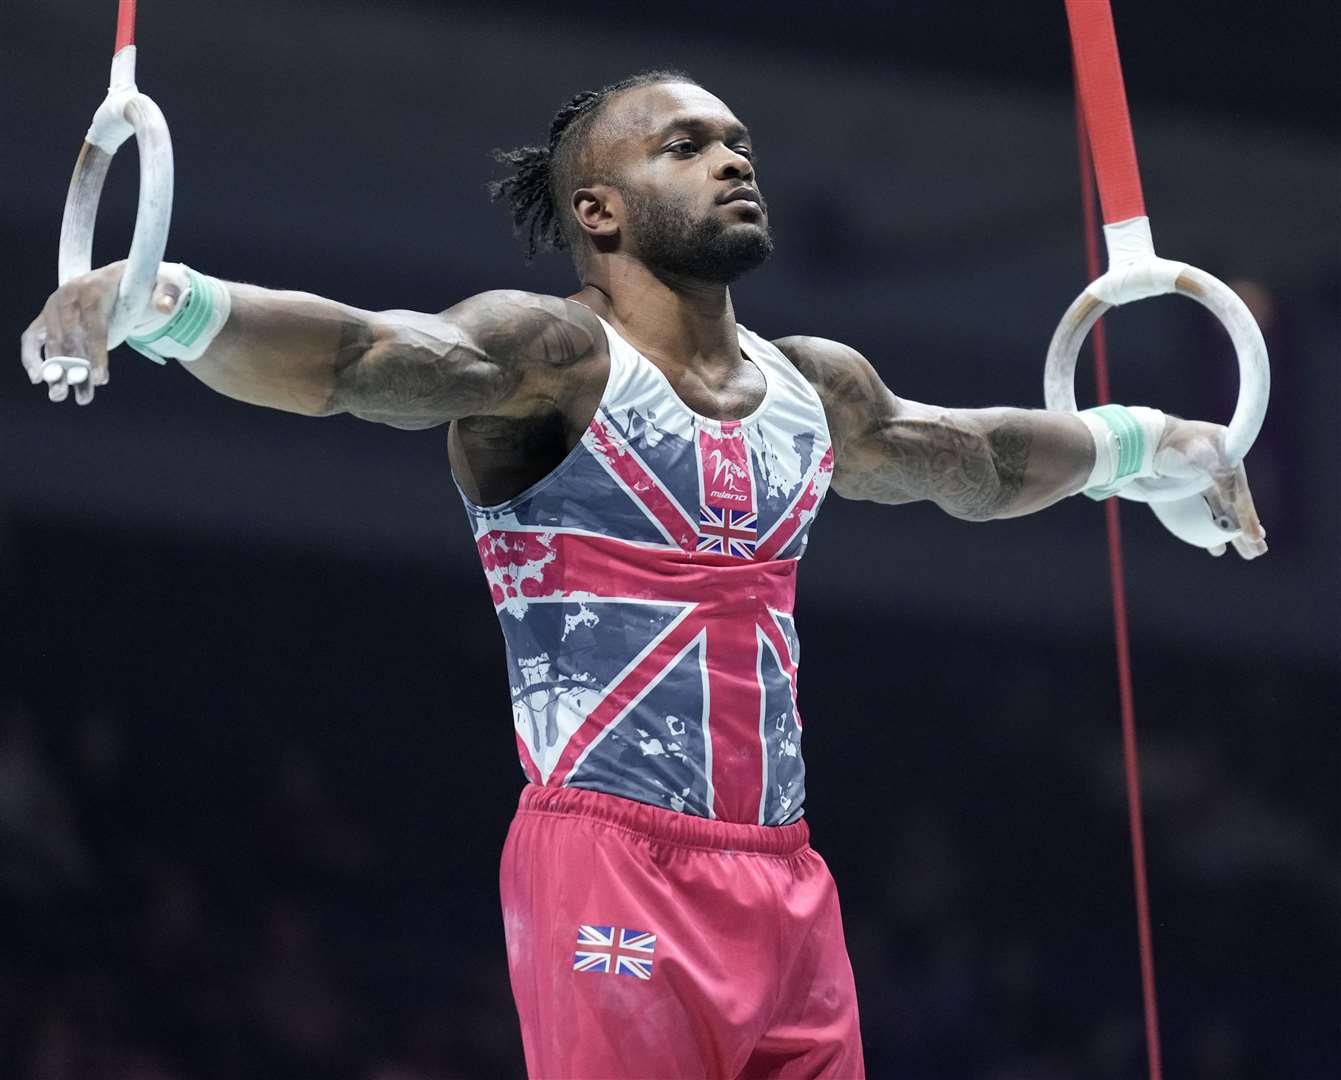 Maidstone's Courtney Tulloch was a class act on the rings at the World Gymnastics Championships. Picture: Simone Ferraro